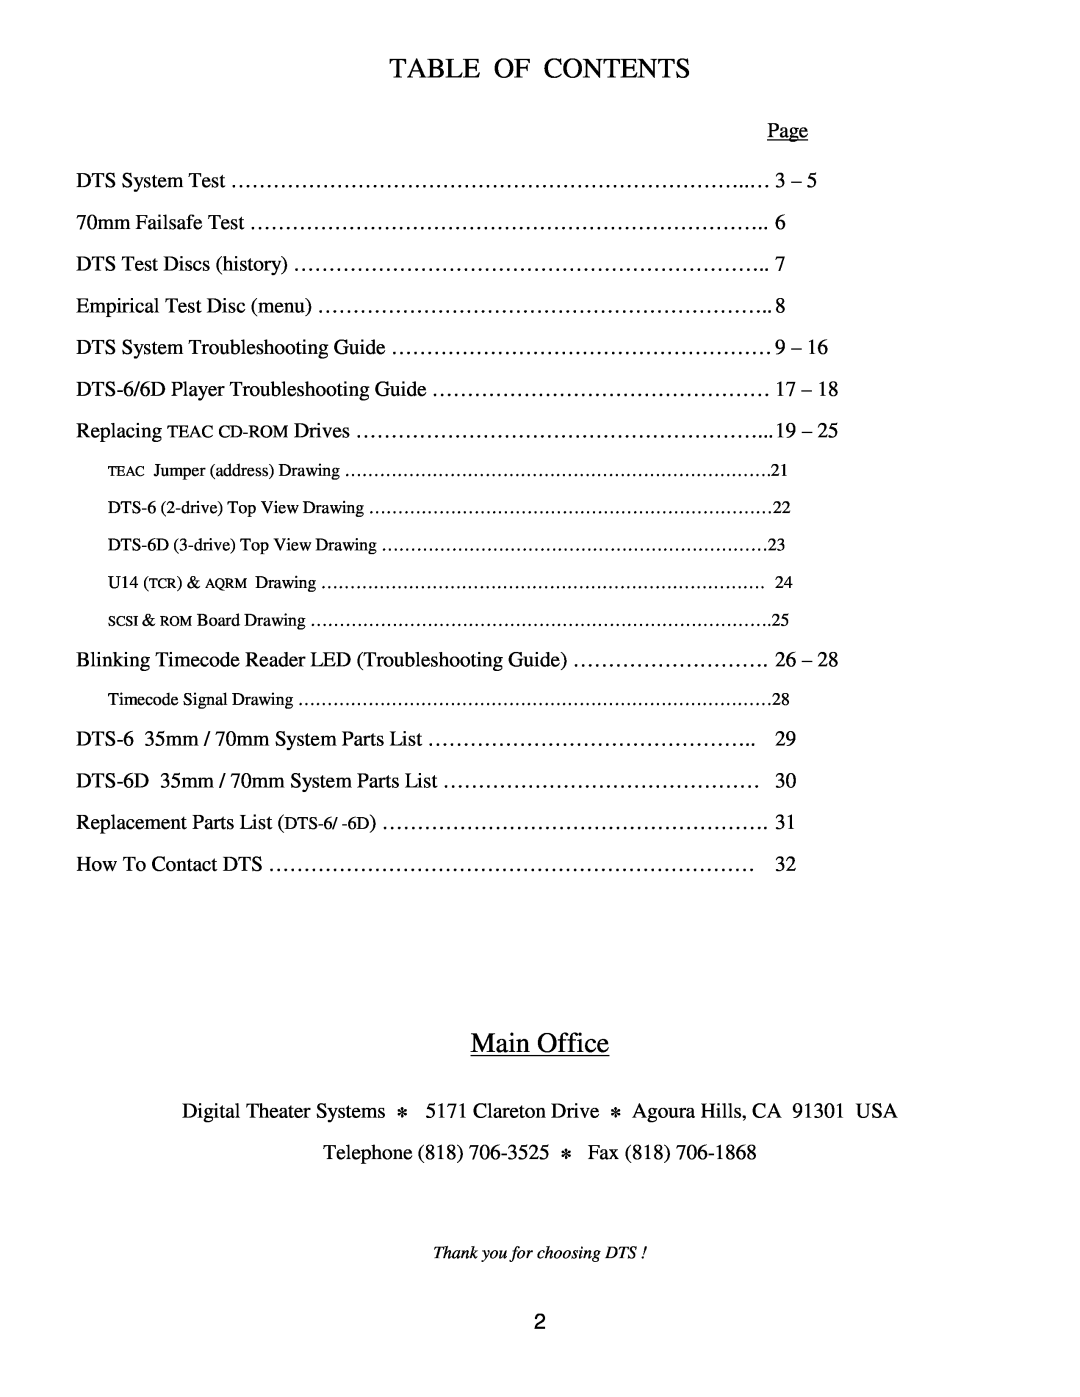 DTS DTS-6D manual Table Of Contents, Main Office 